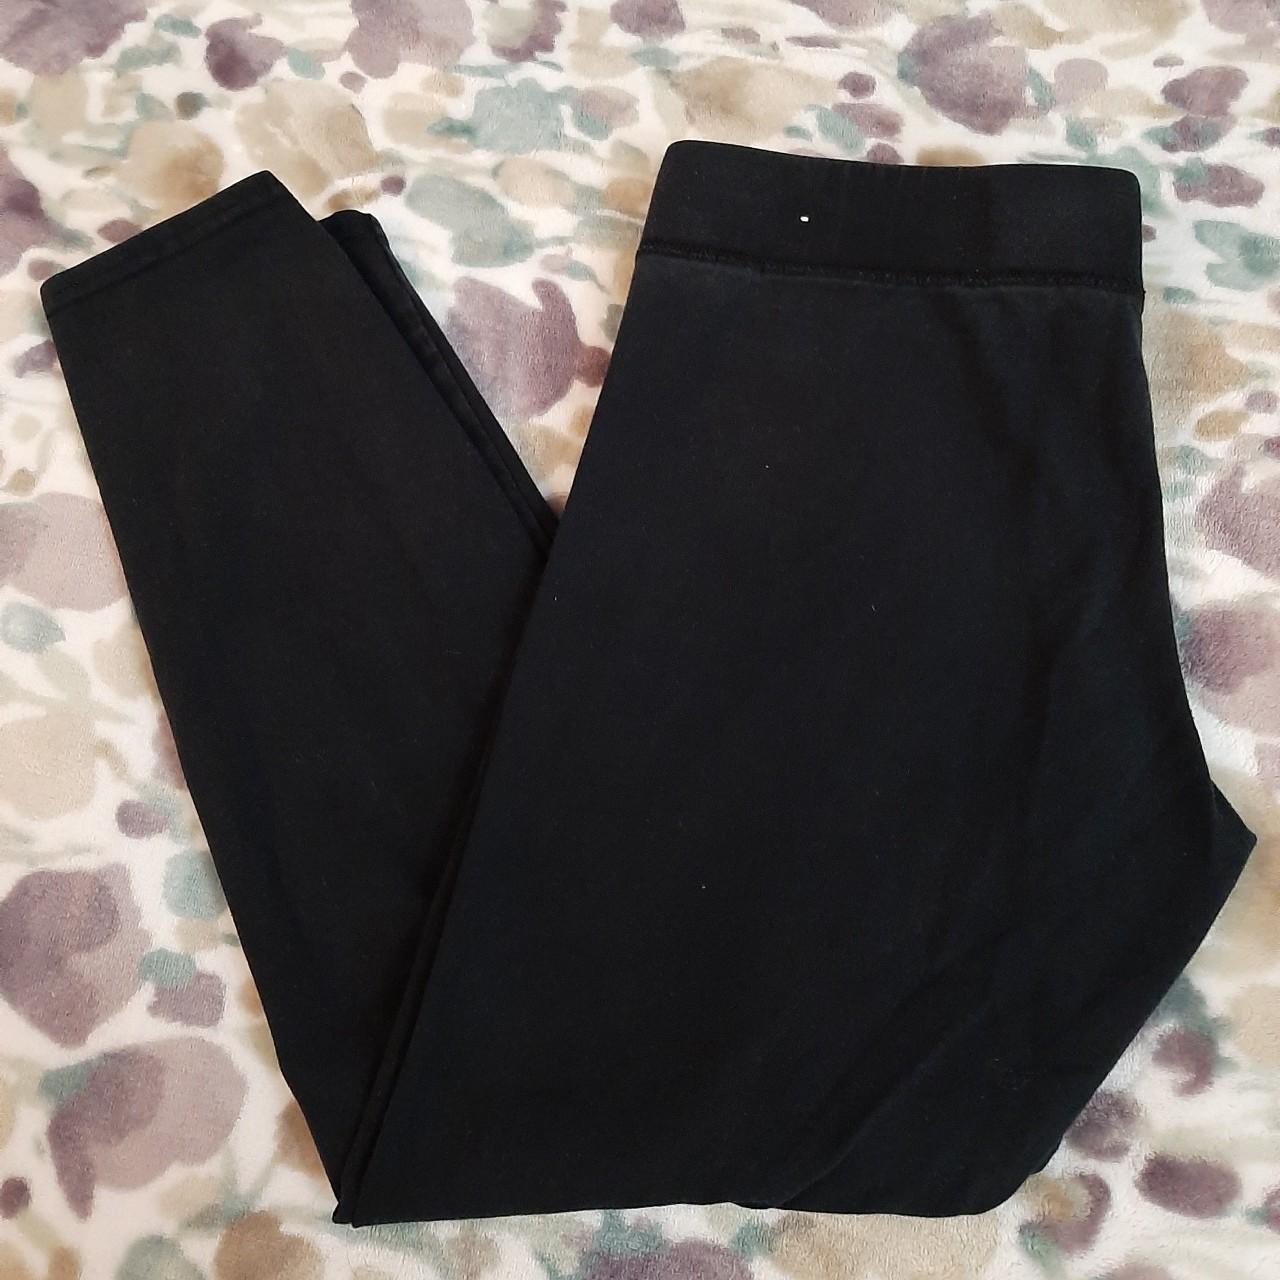 Aerie chill play move black leggings from American - Depop